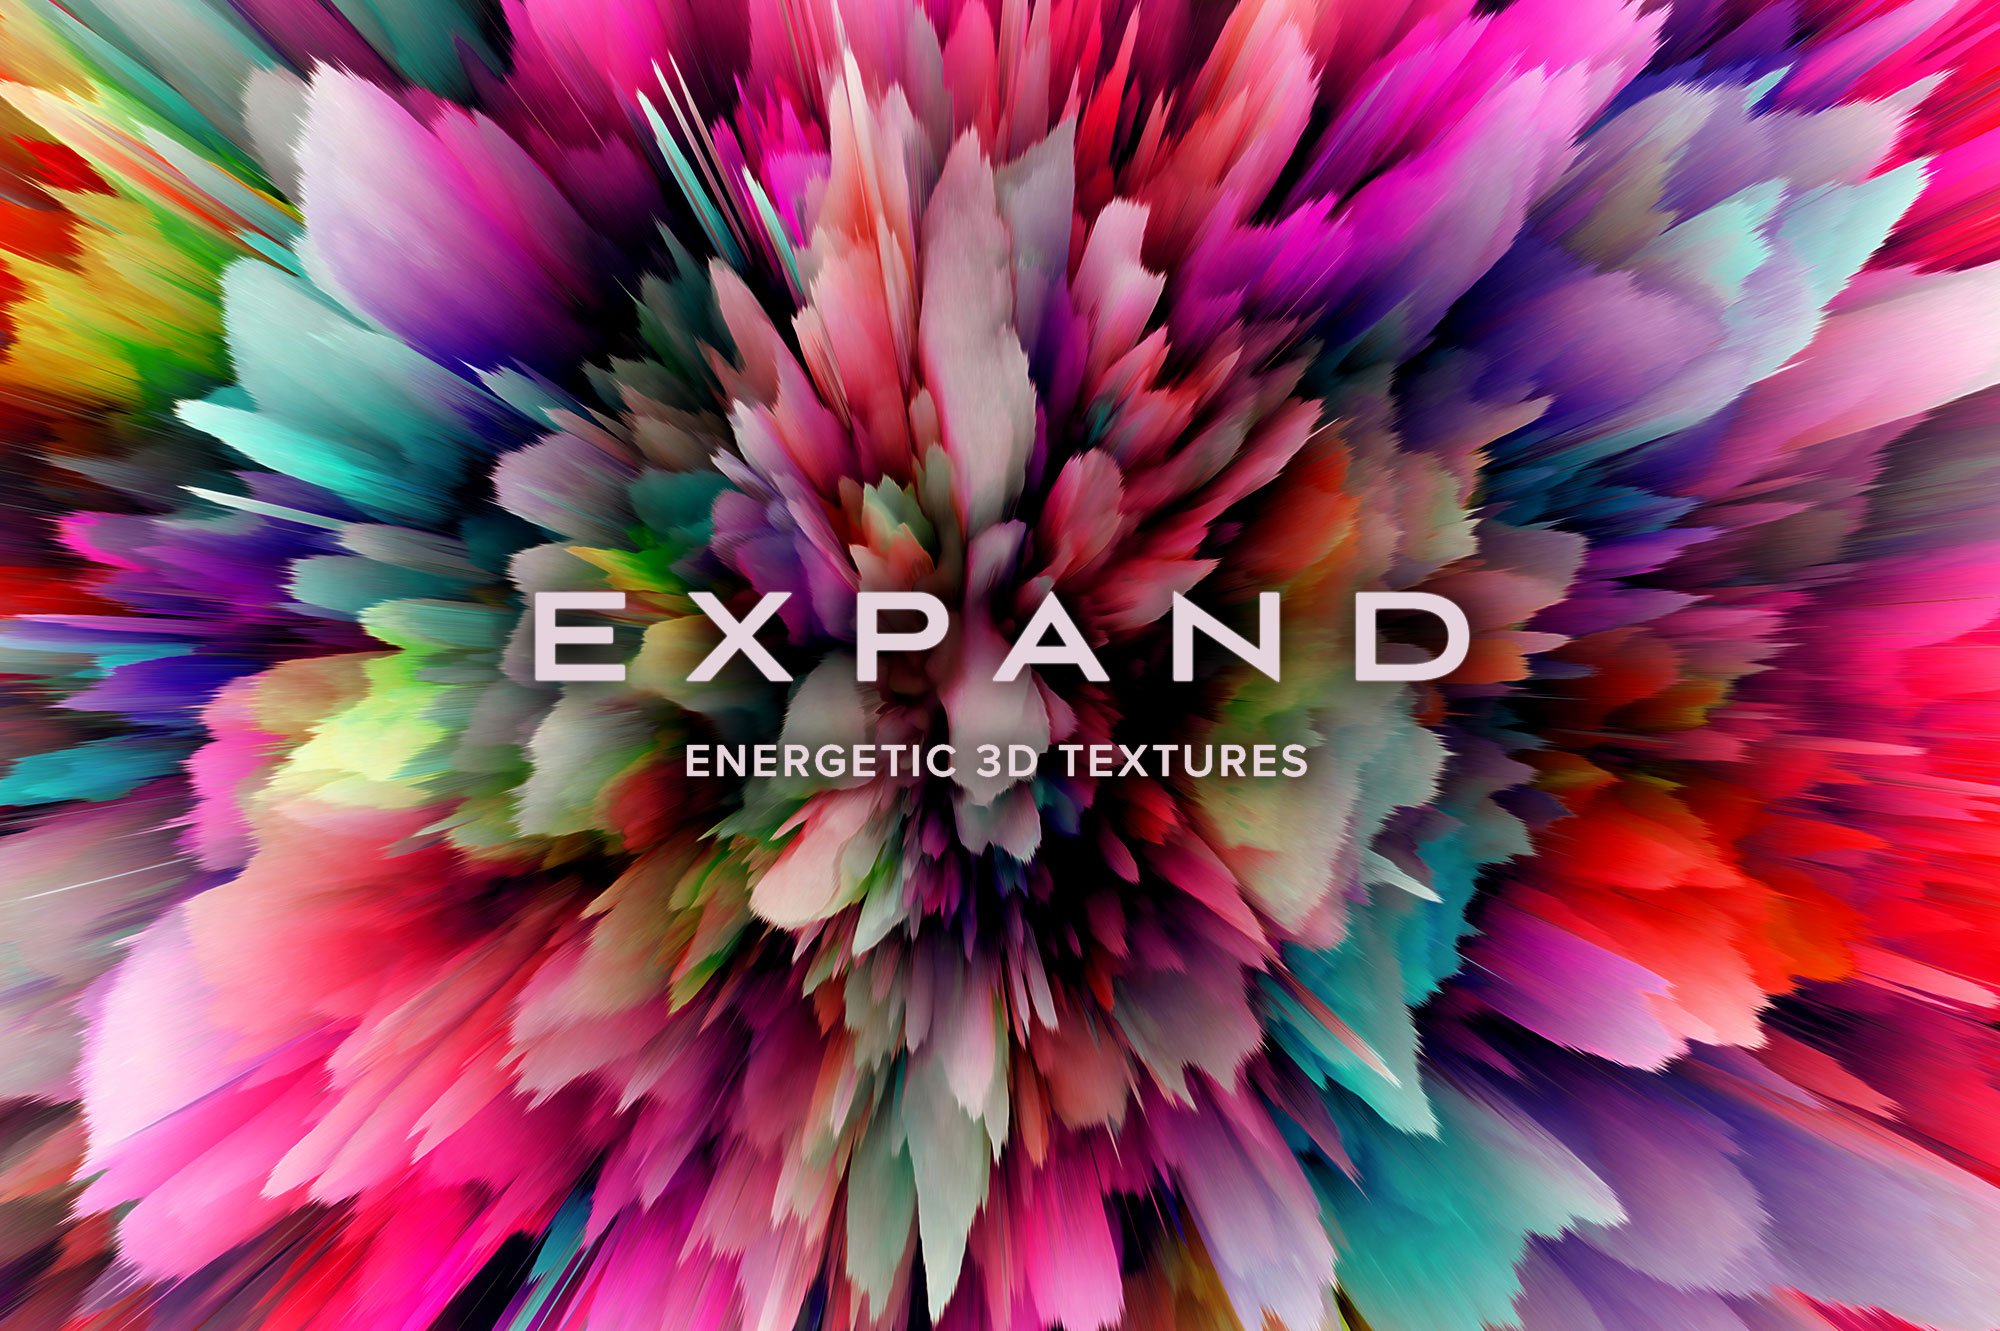 Expand: Energetic 3D Textures cover image.